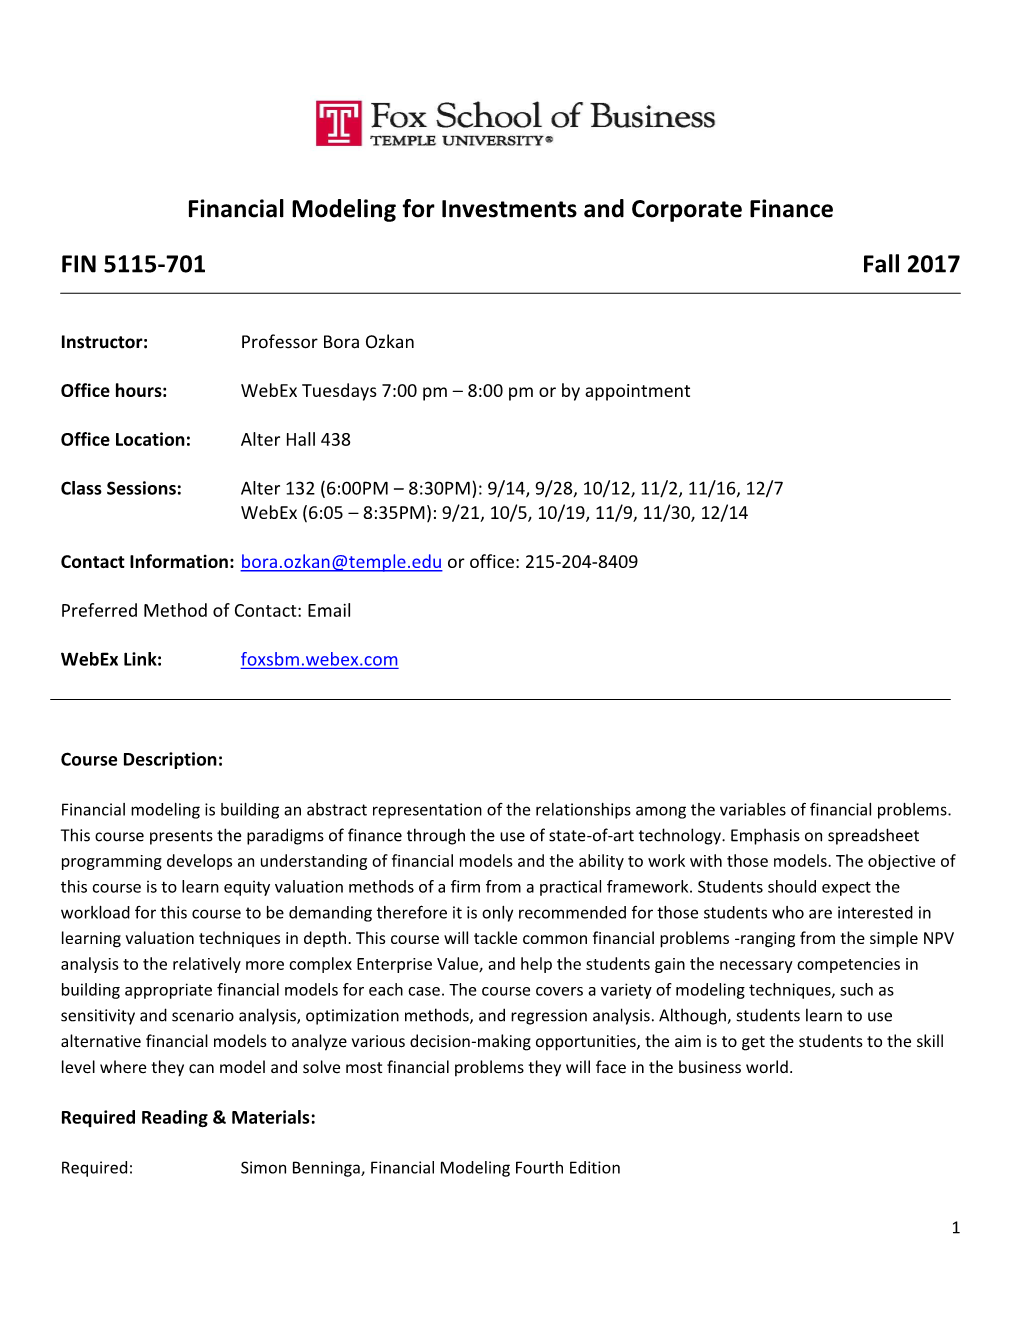 Financial Modeling for Investments and Corporate Finance FIN 5115